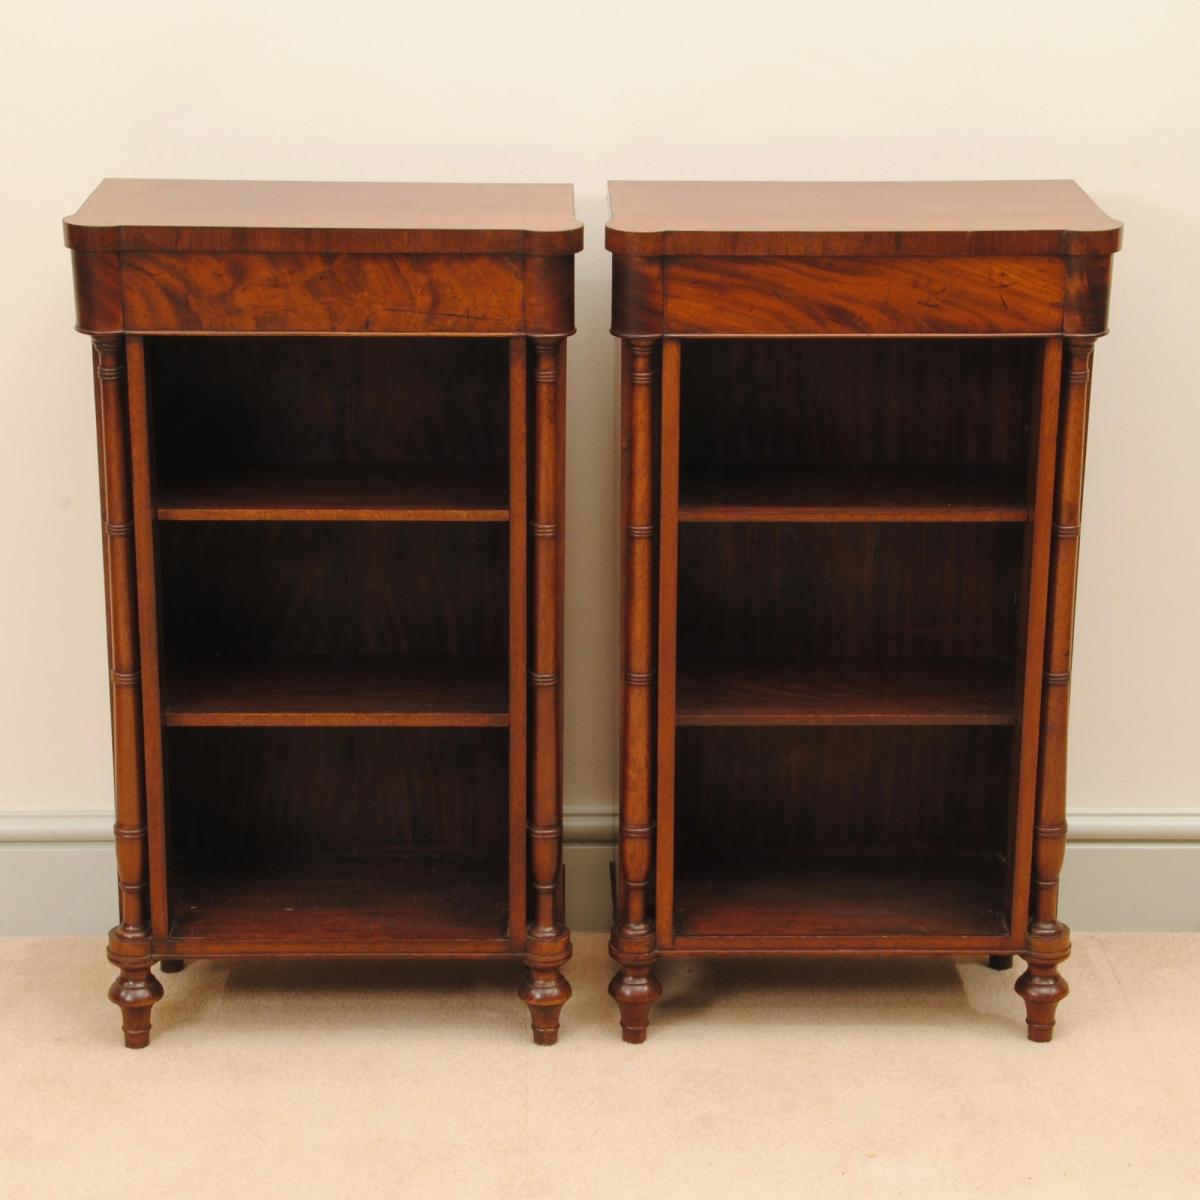 A Charming Pair of Regency Open Bookcases